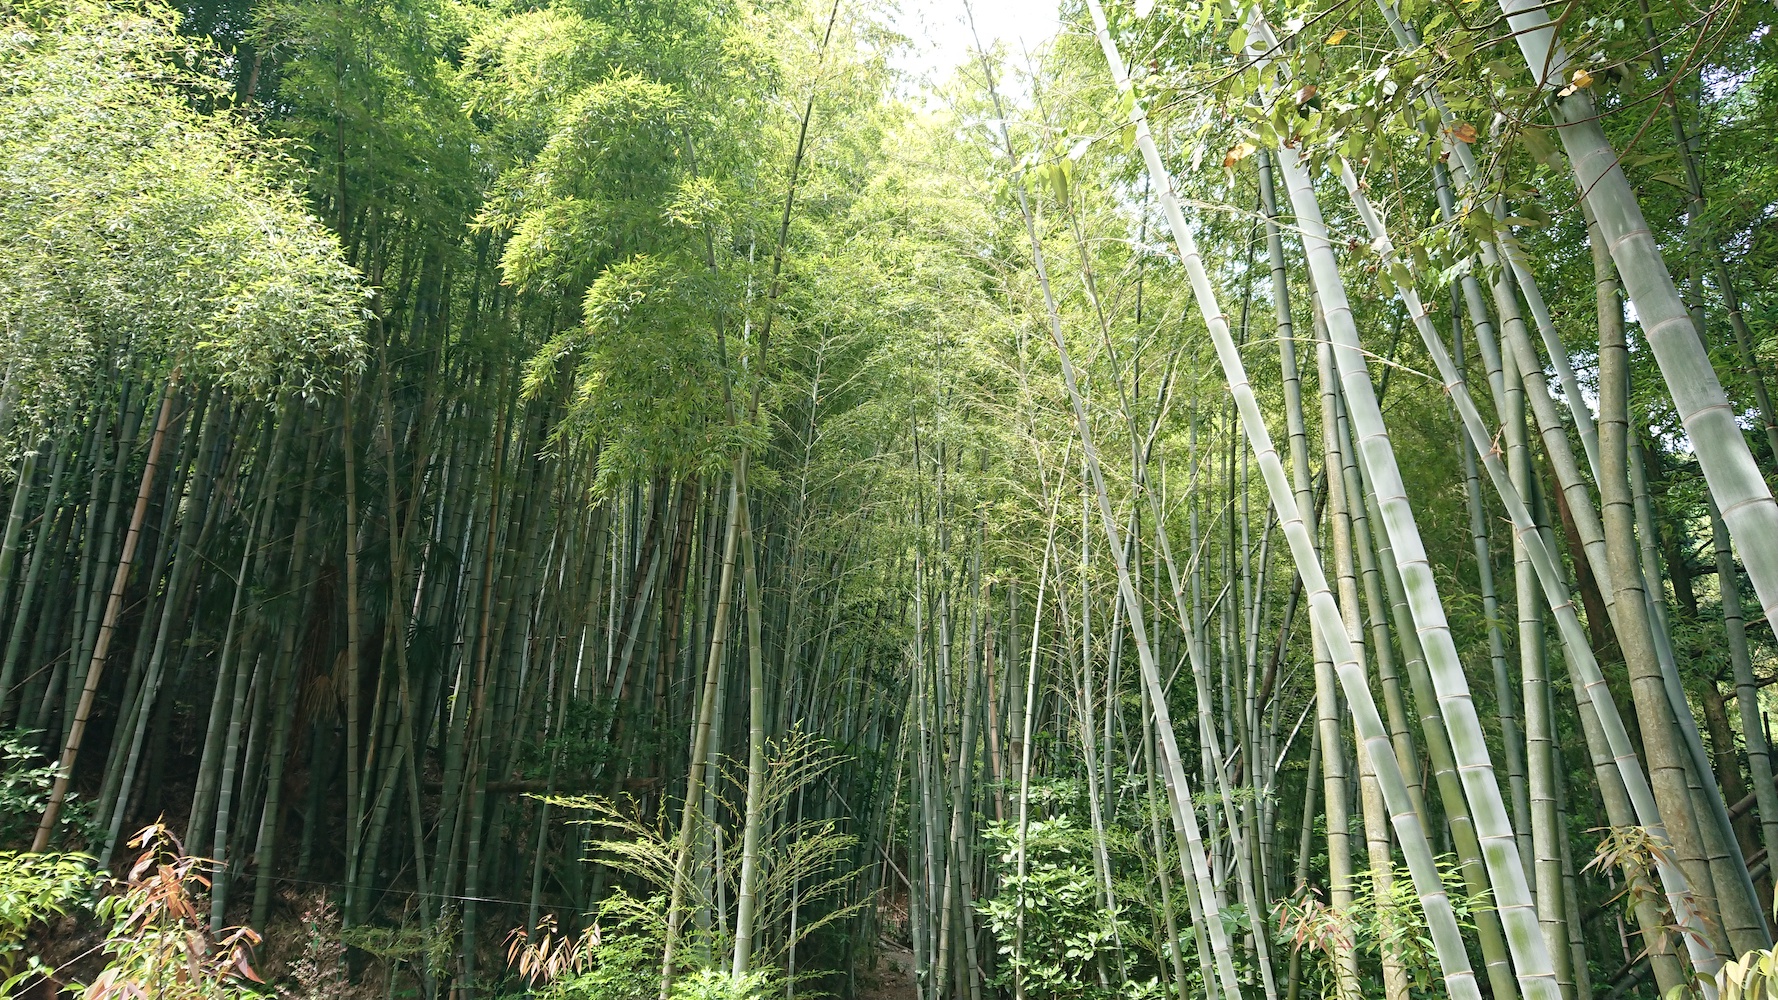  Beppu Hot Springs Bamboo Forest